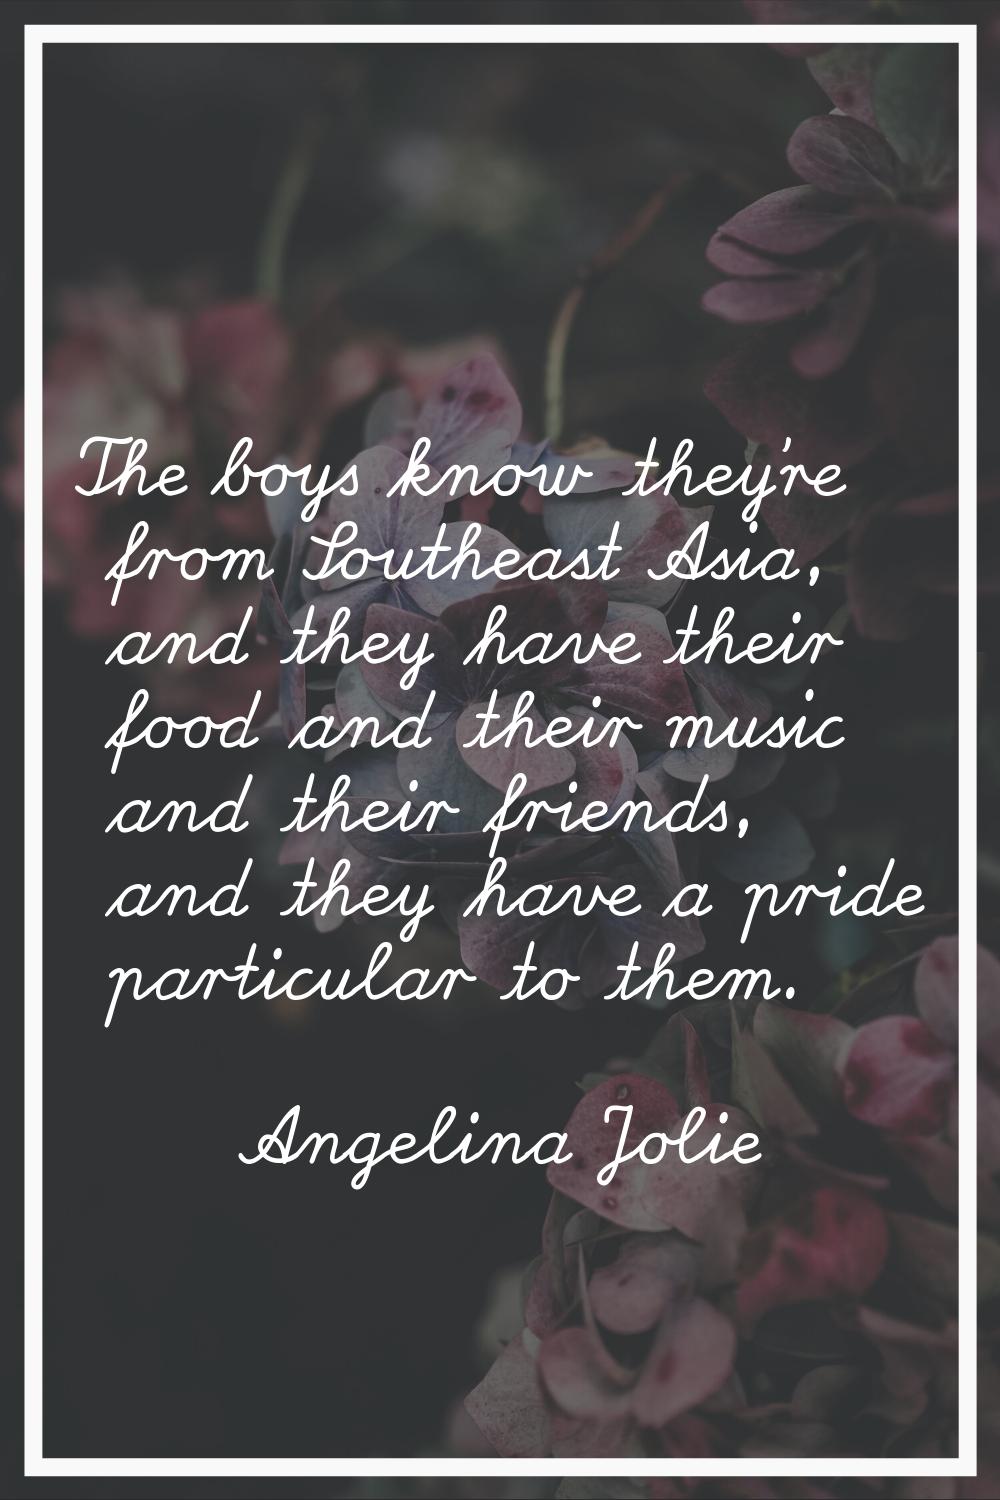 The boys know they're from Southeast Asia, and they have their food and their music and their frien